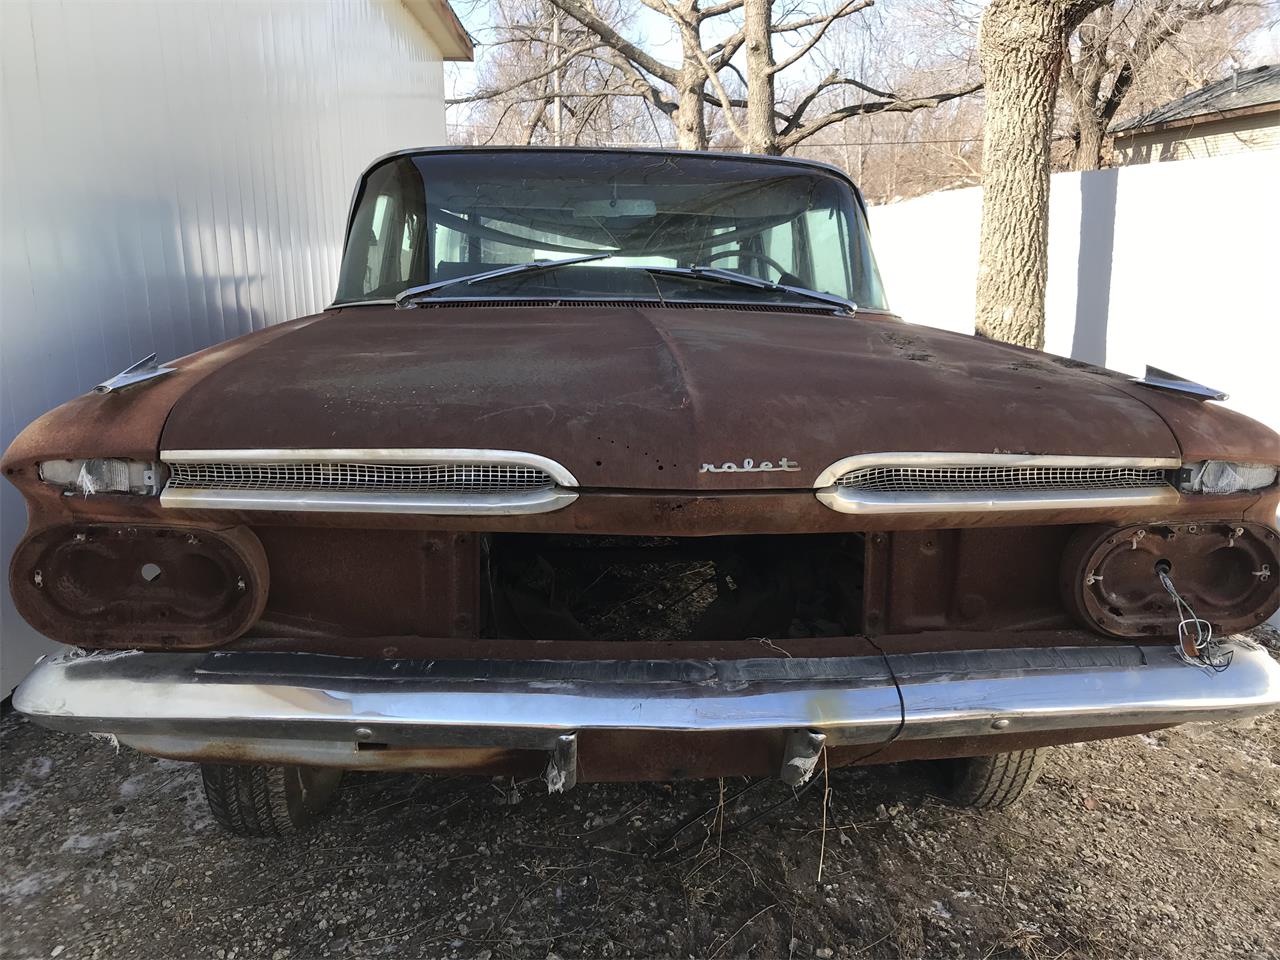 1959 Chevrolet Station Wagon for sale in Bel Aire, KS